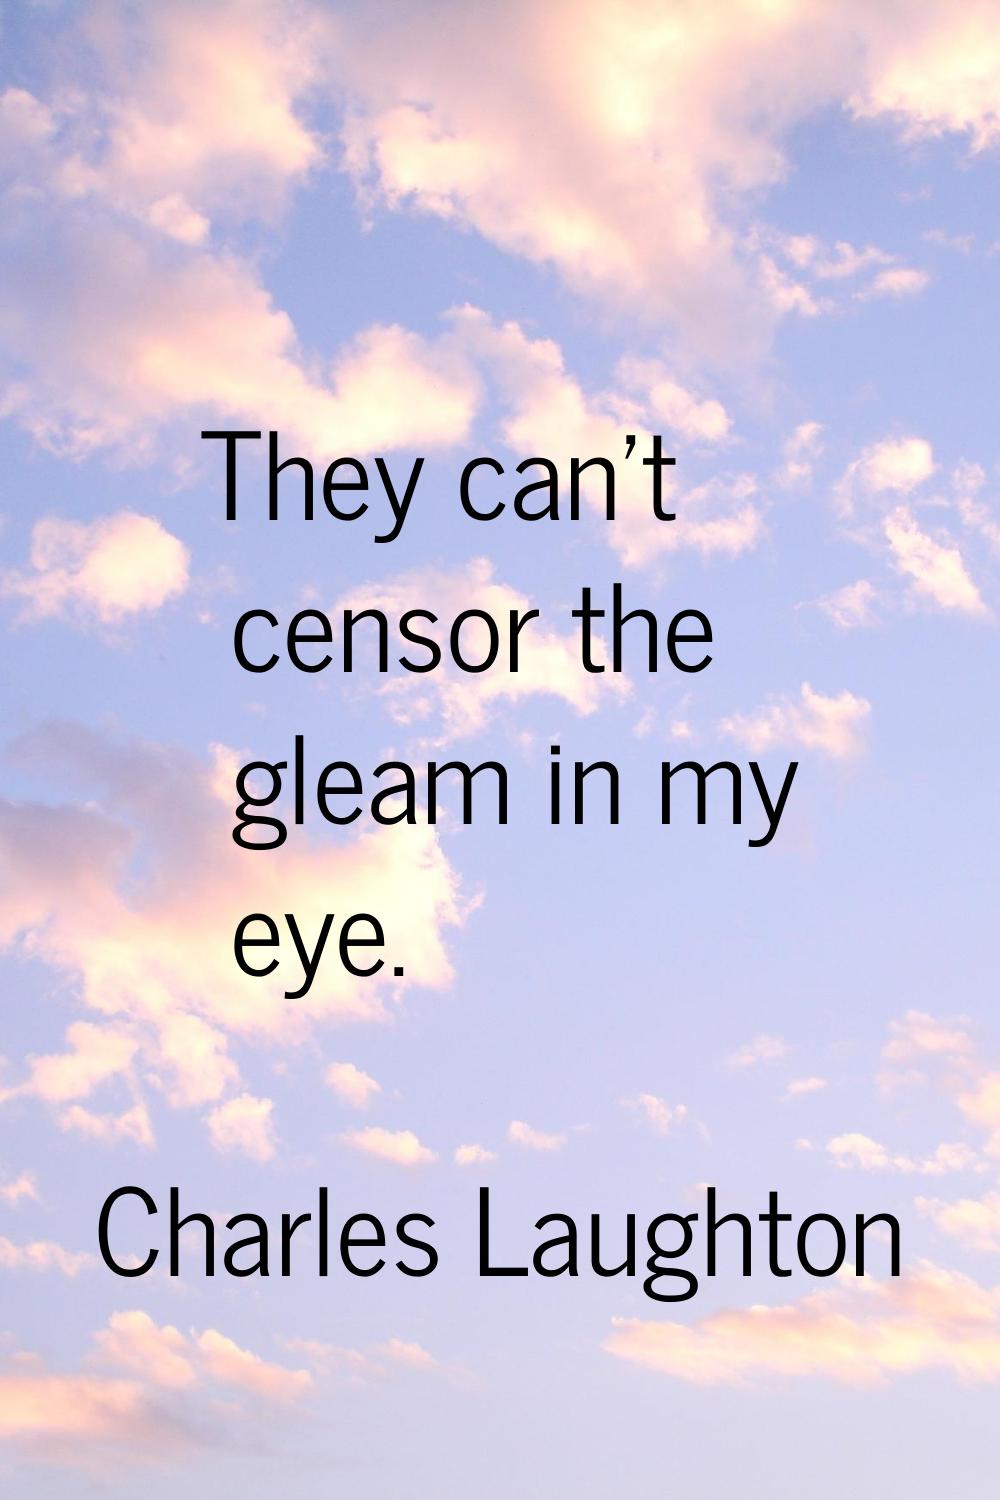 They can't censor the gleam in my eye.